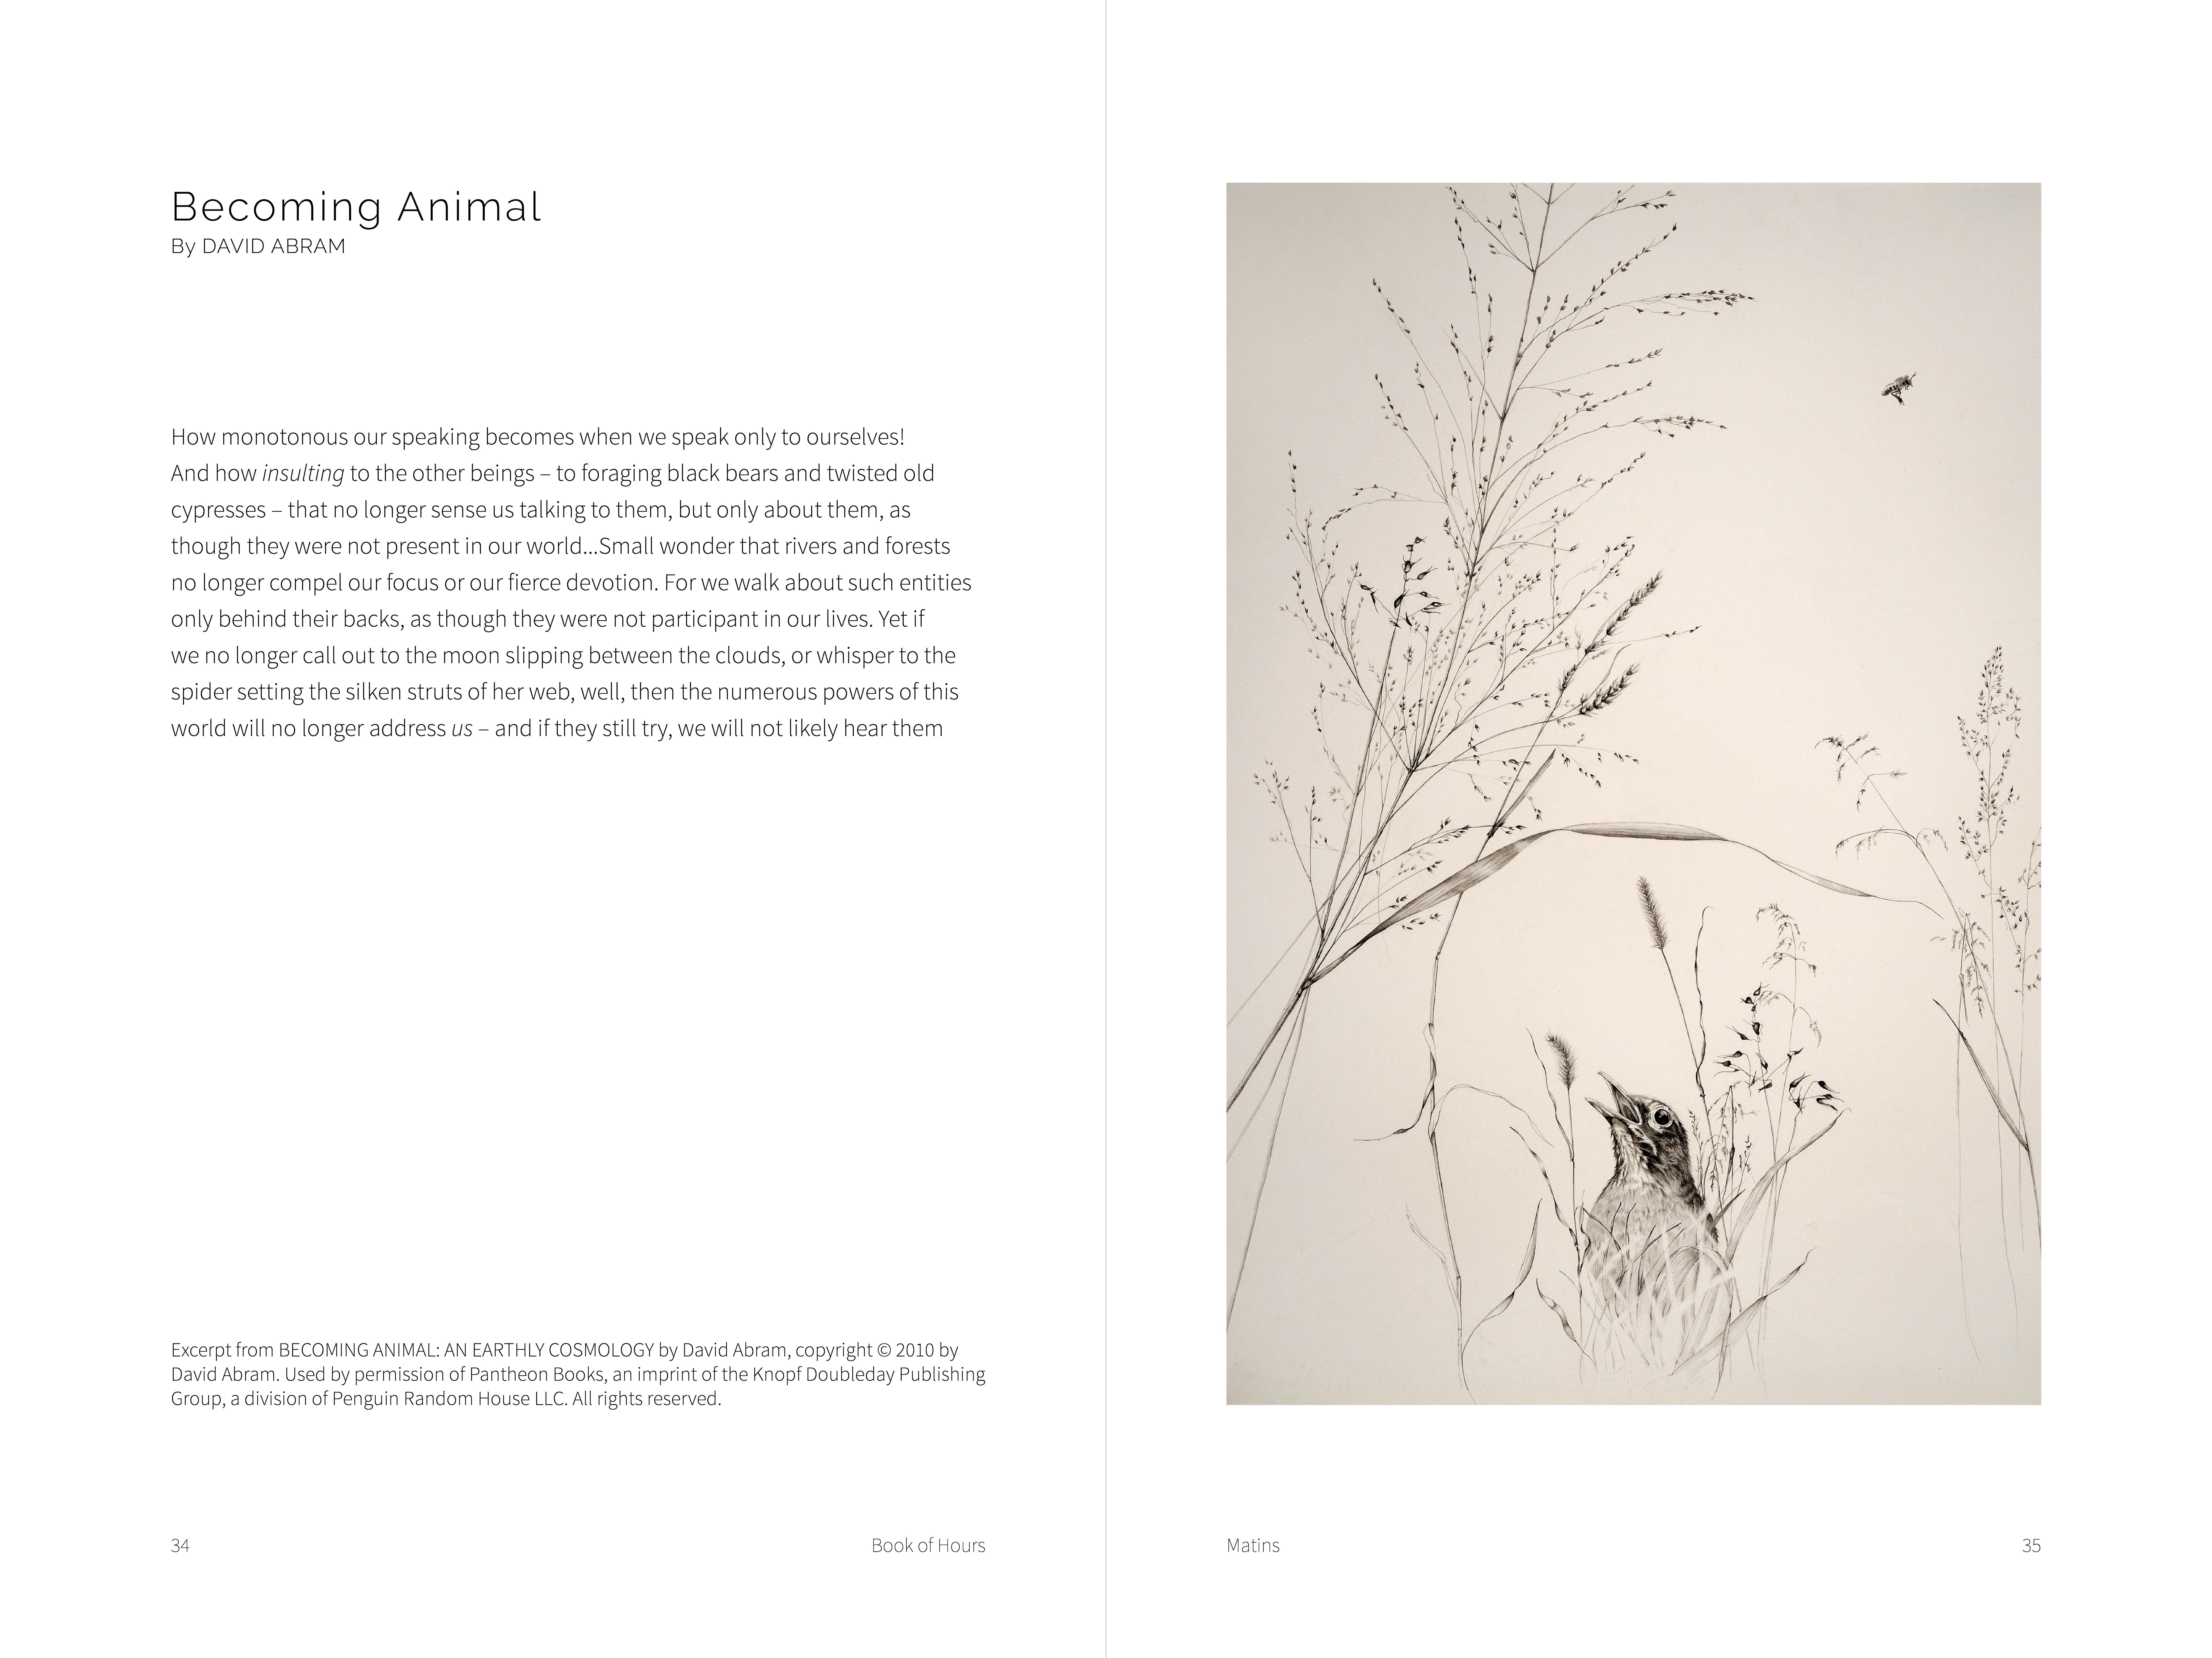 Excerpt from David Abrams "Becoming Animal: An Earthly Cosmology," 2010 and Rebecca Clark "Bird, Bee, and Late Summer Grass," 2011, graphite on paper, 30 x 22 in. (from Book of Hours)